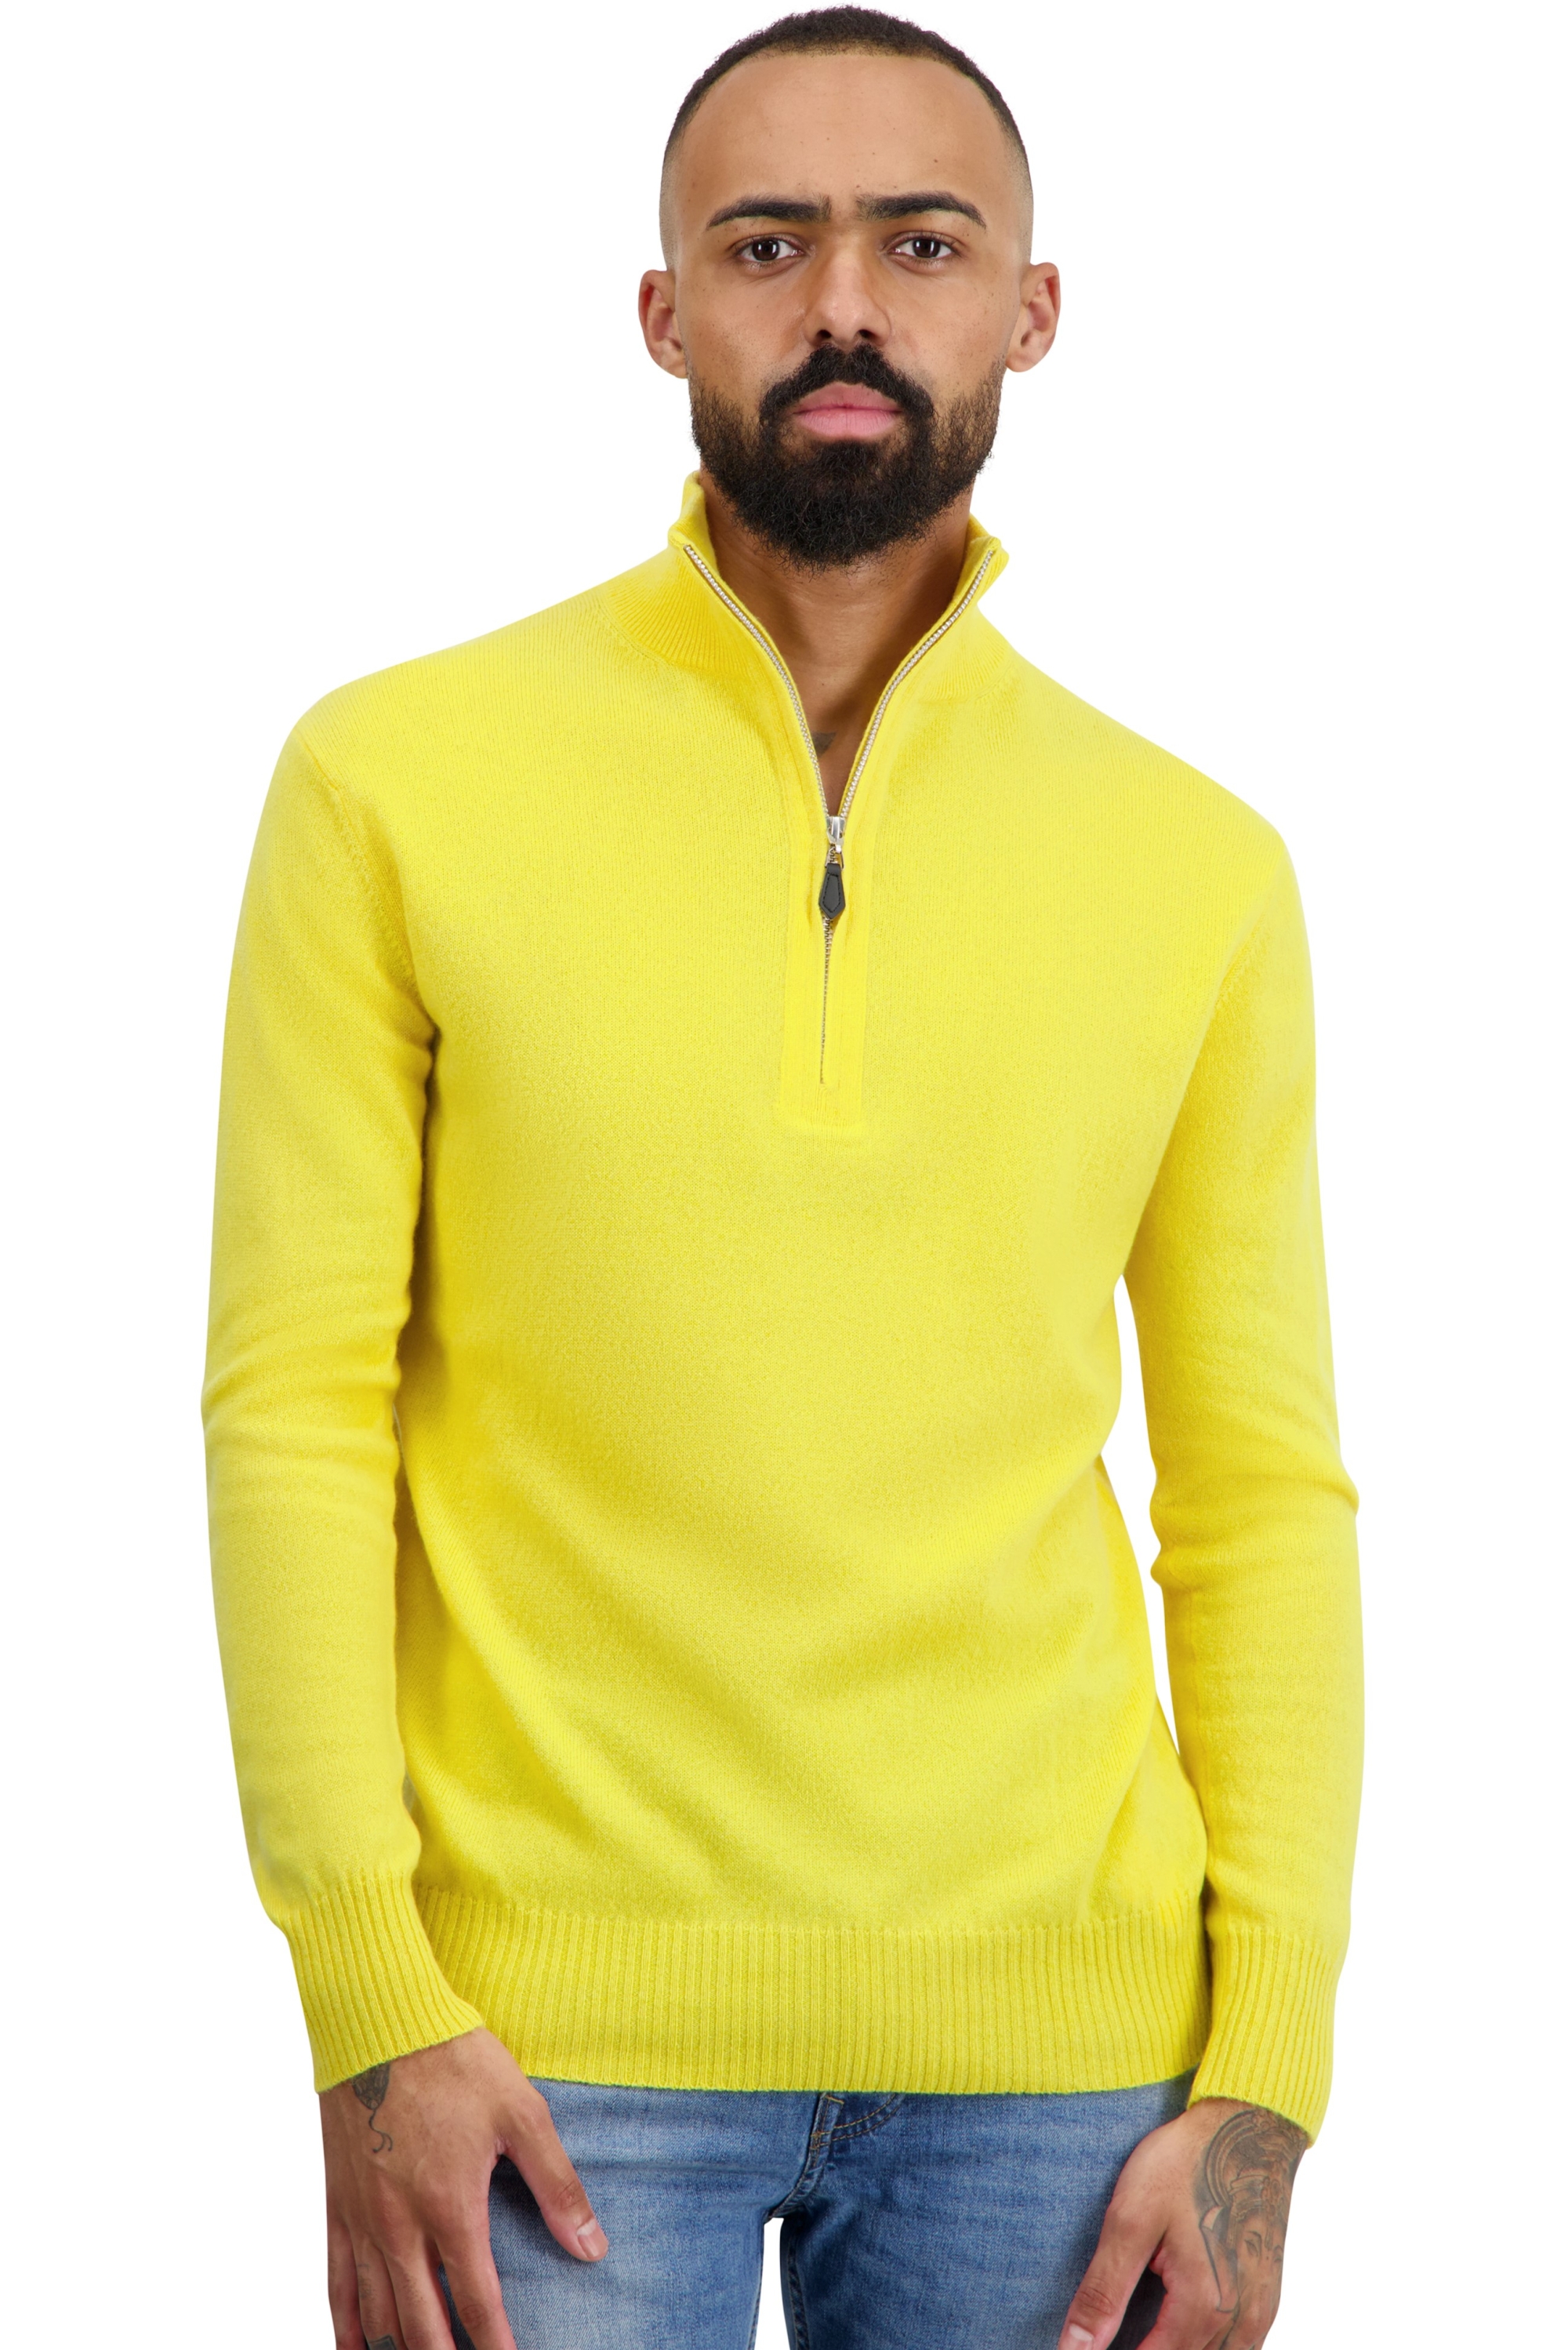 Cashmere men low prices toulon first daffodil s